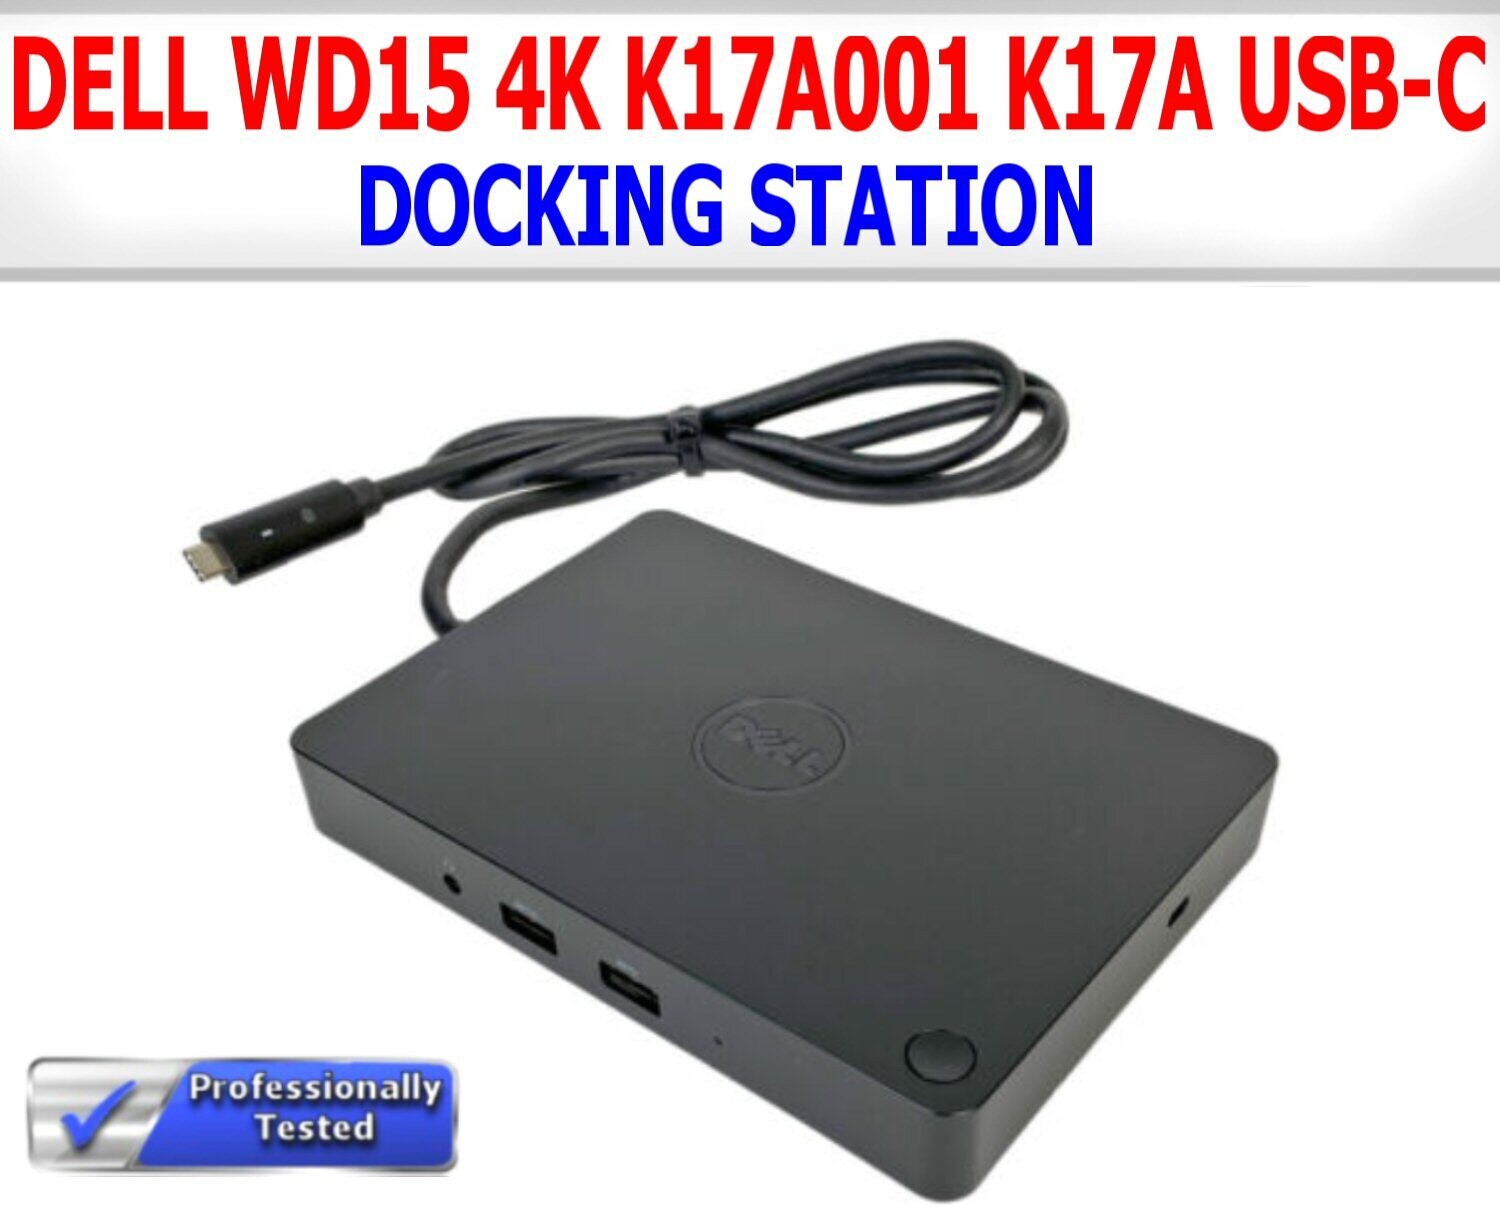 DELL WD15 4K K17A001 K17A USB-C DOCKING STATION 130W AC ADAPTER W/EXTRAS  TESTED